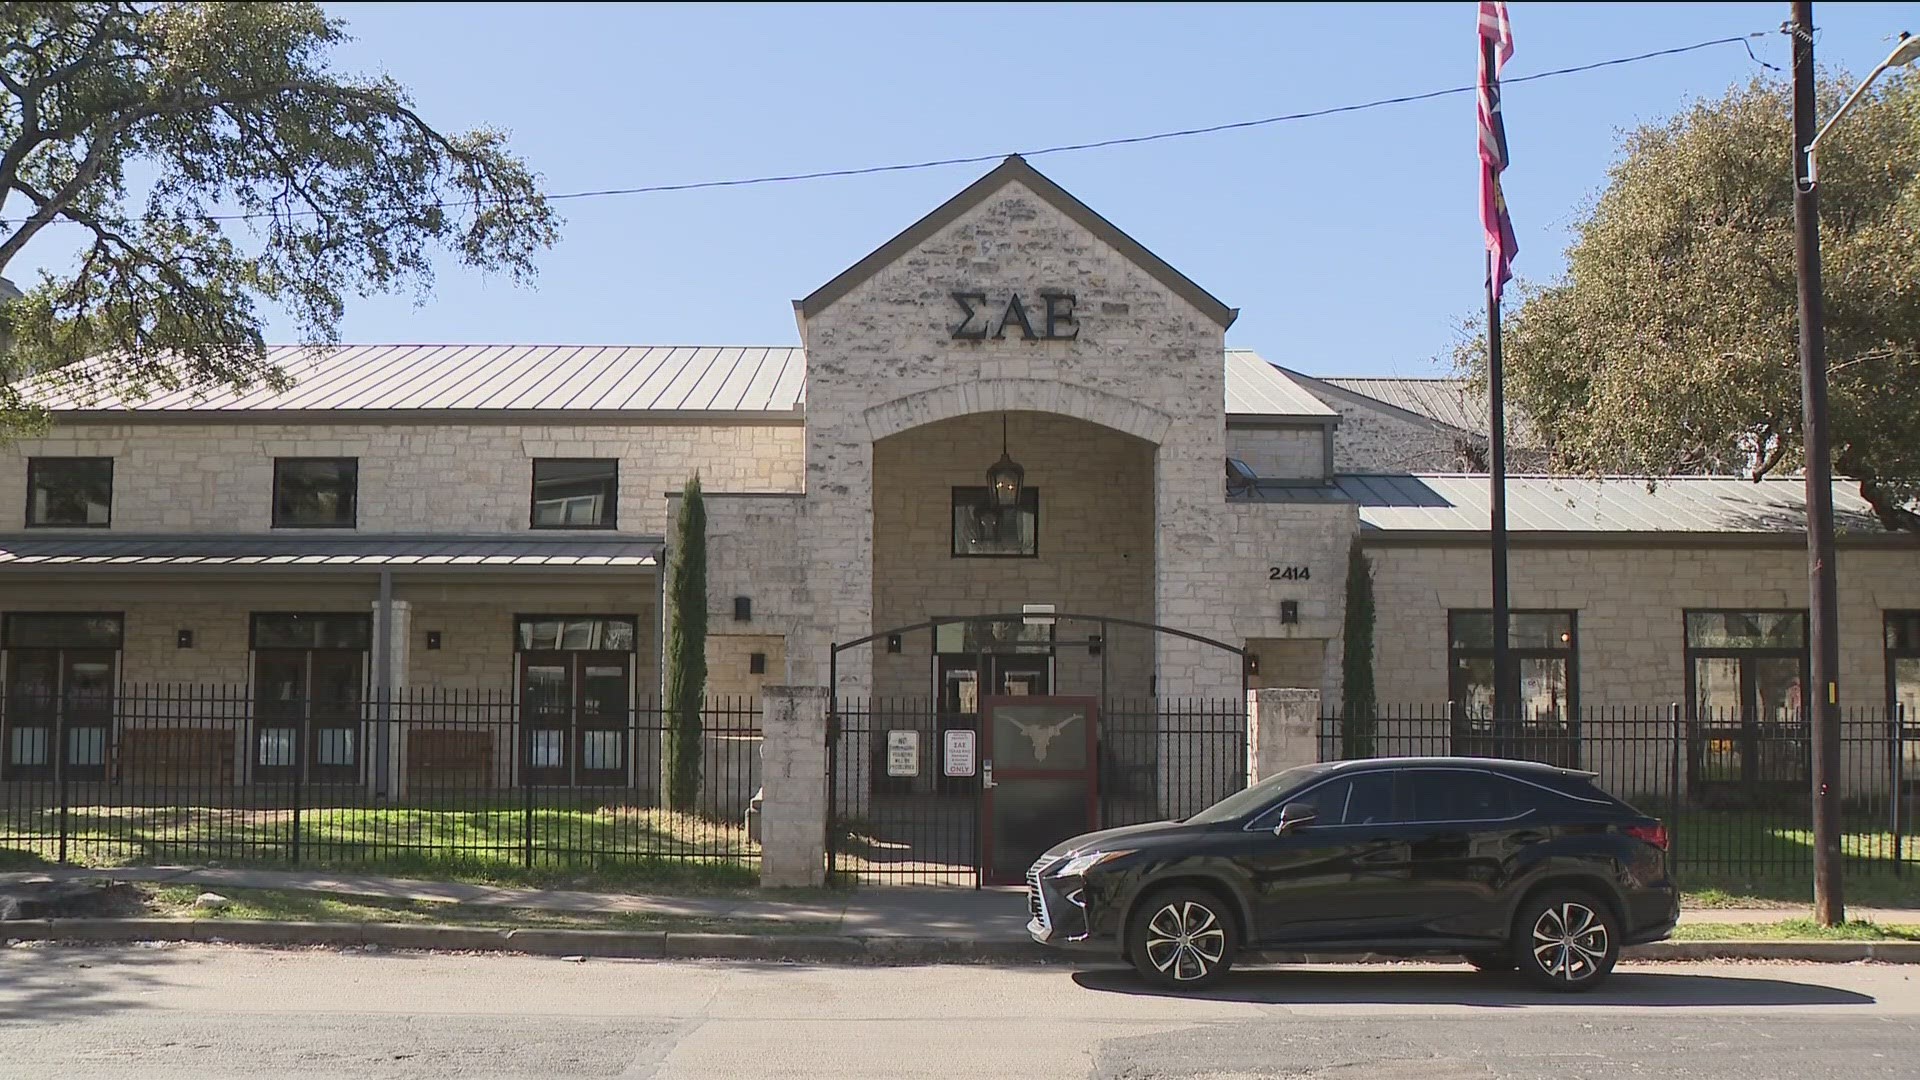 A lawsuit was launched by a former exchange student, who claims several members of the Sigma Alpha Epsilon fraternity injured him in an attack at a 2023 party.